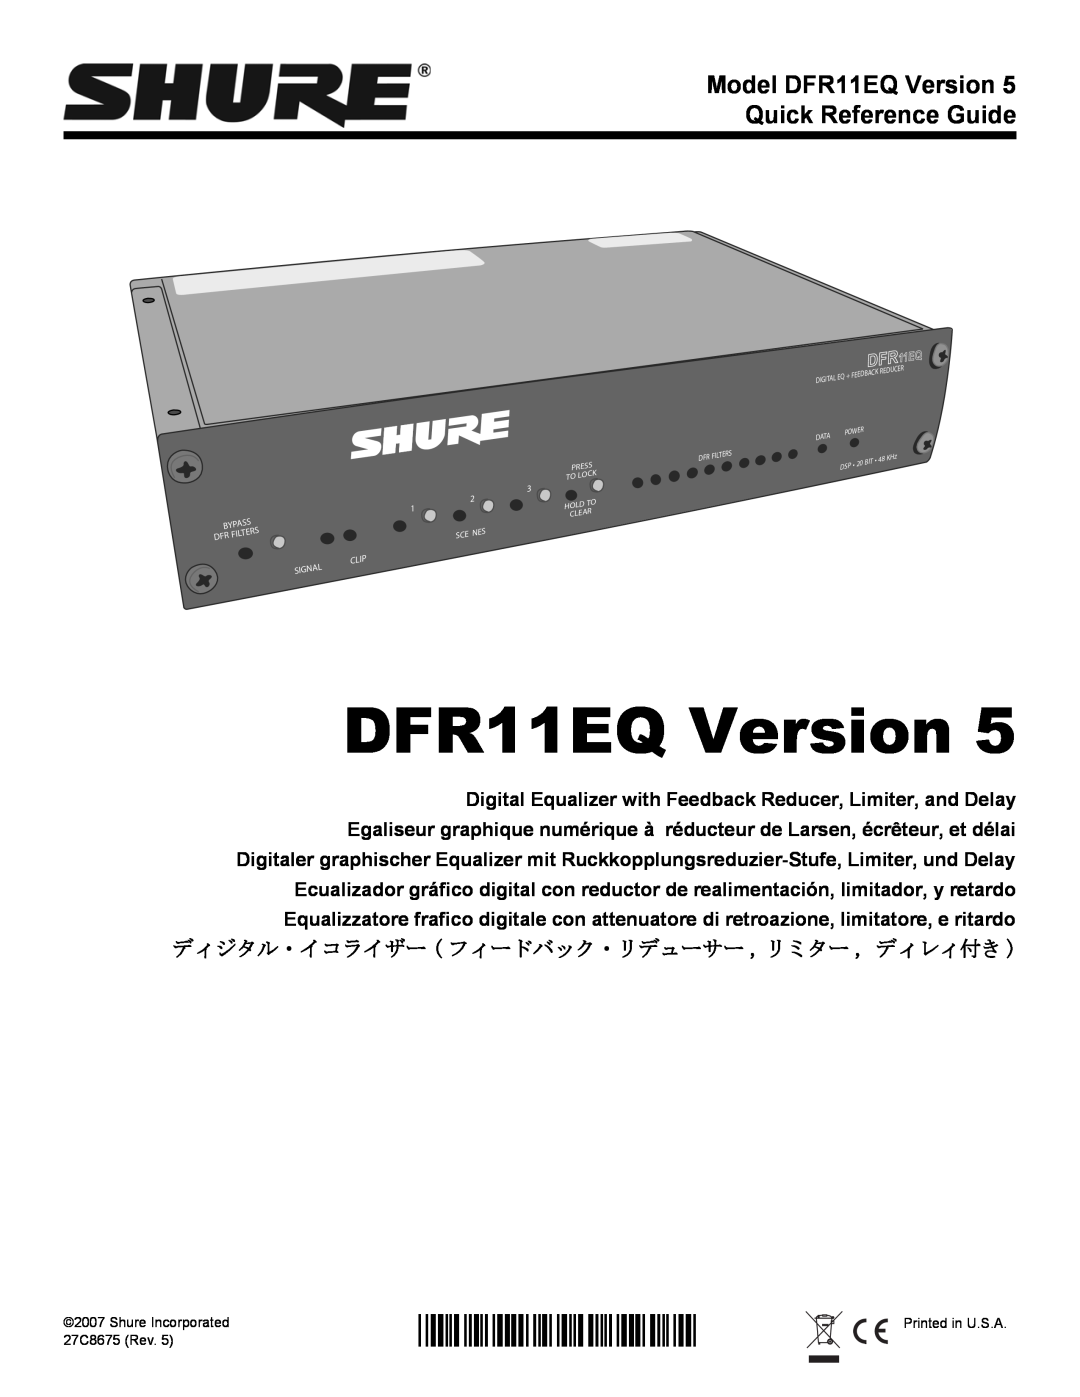 Shure manual 27C8675, Model DFR11EQ Version 5 Quick Reference Guide 